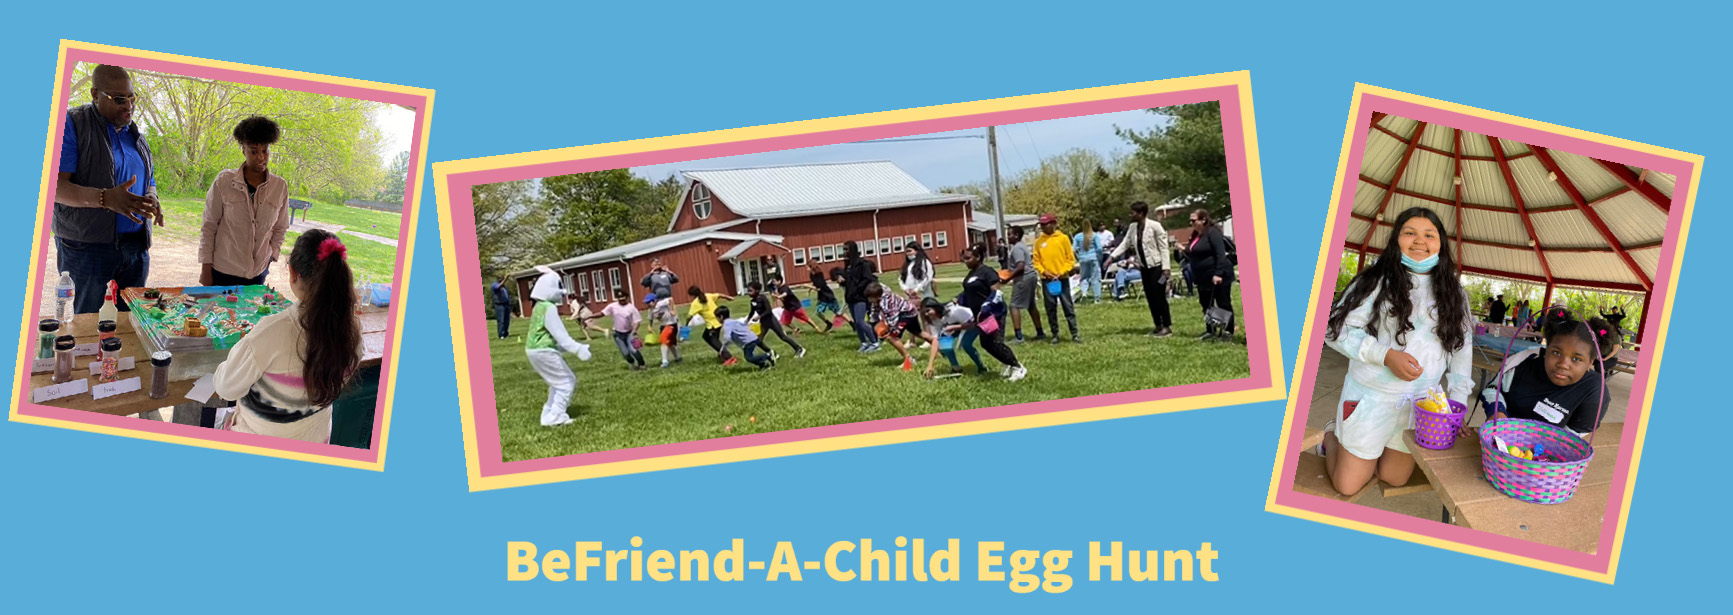 BeFriend-A-Child Egg Hunt activity collage of group photos